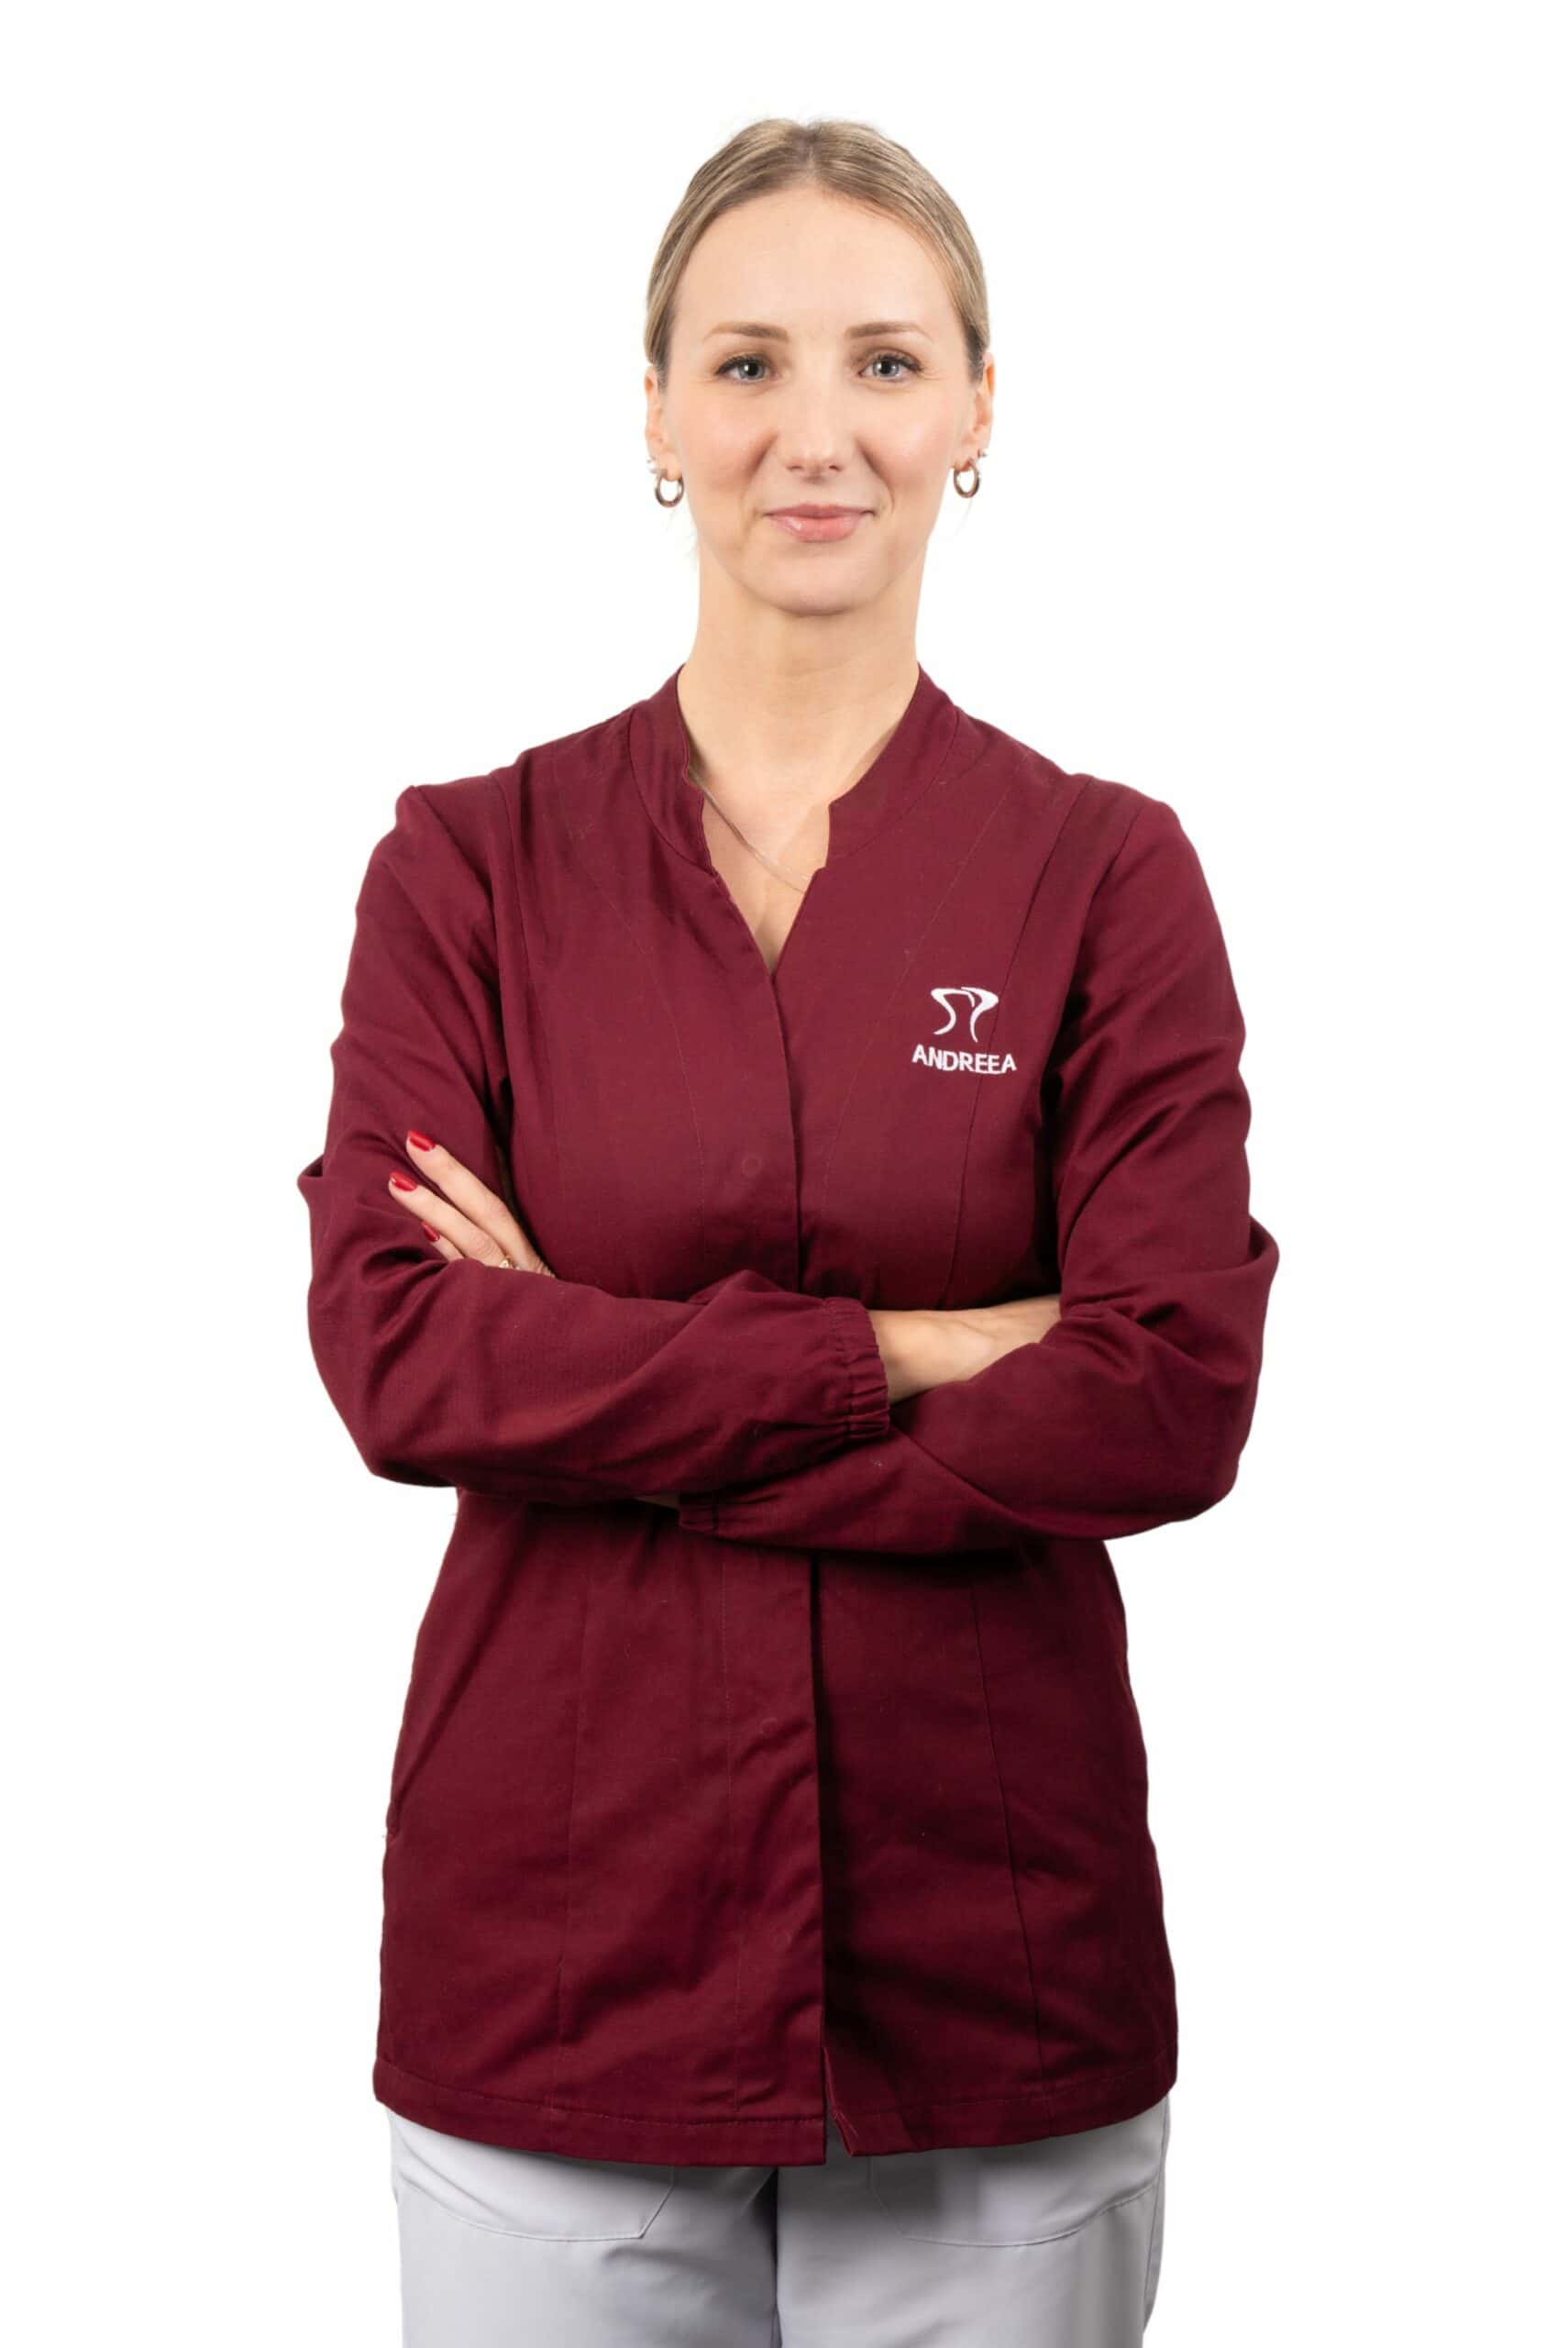 A female healthcare worker in a maroon uniform with crossed arms, standing against a white background, affiliated with Dentalmed Group.